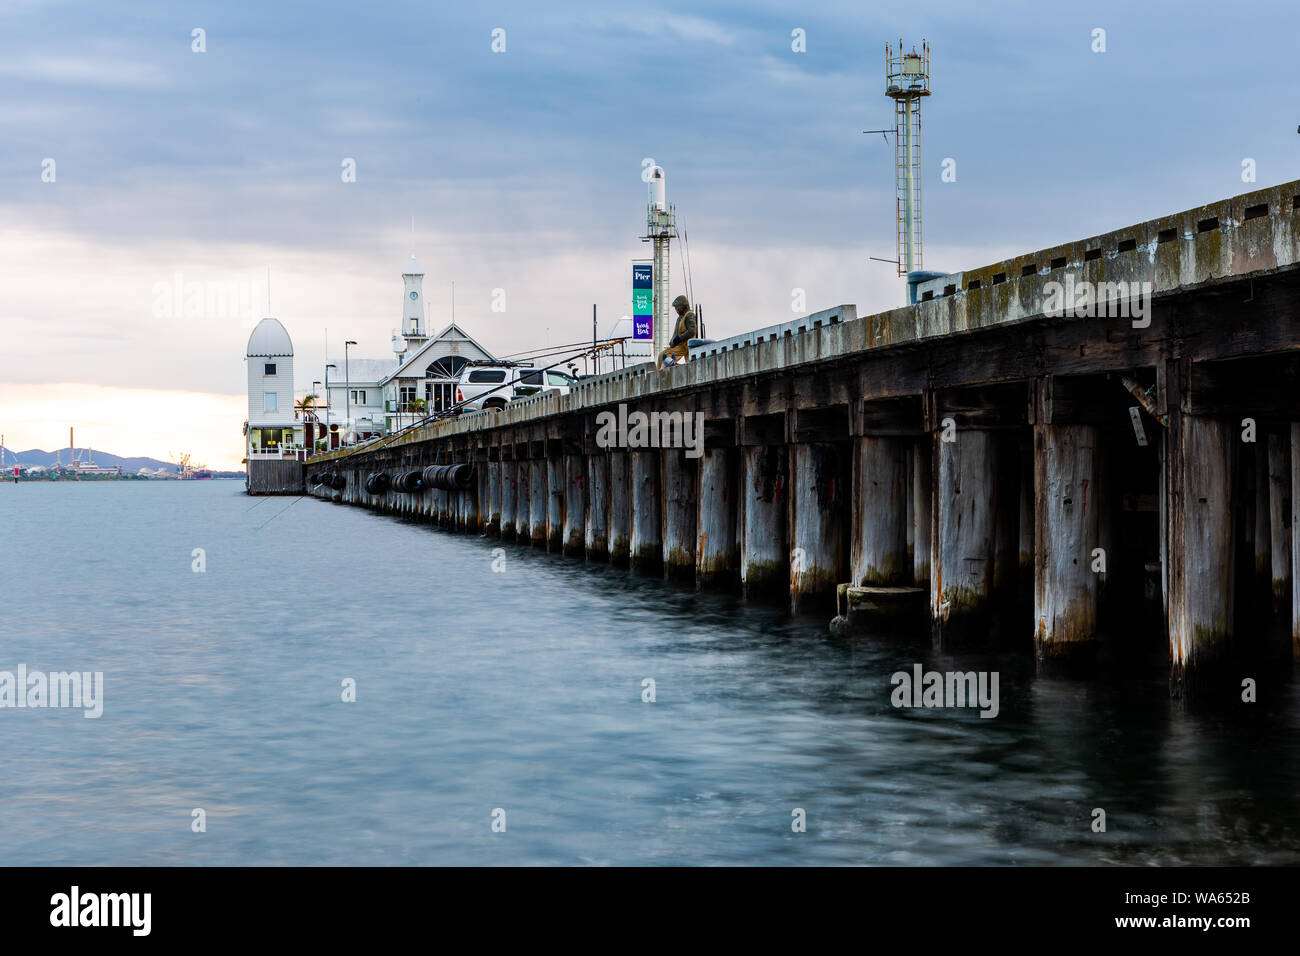 The cunningham pier at sunrise located at geelong victoria australia on 6th August 2019 Stock Photo